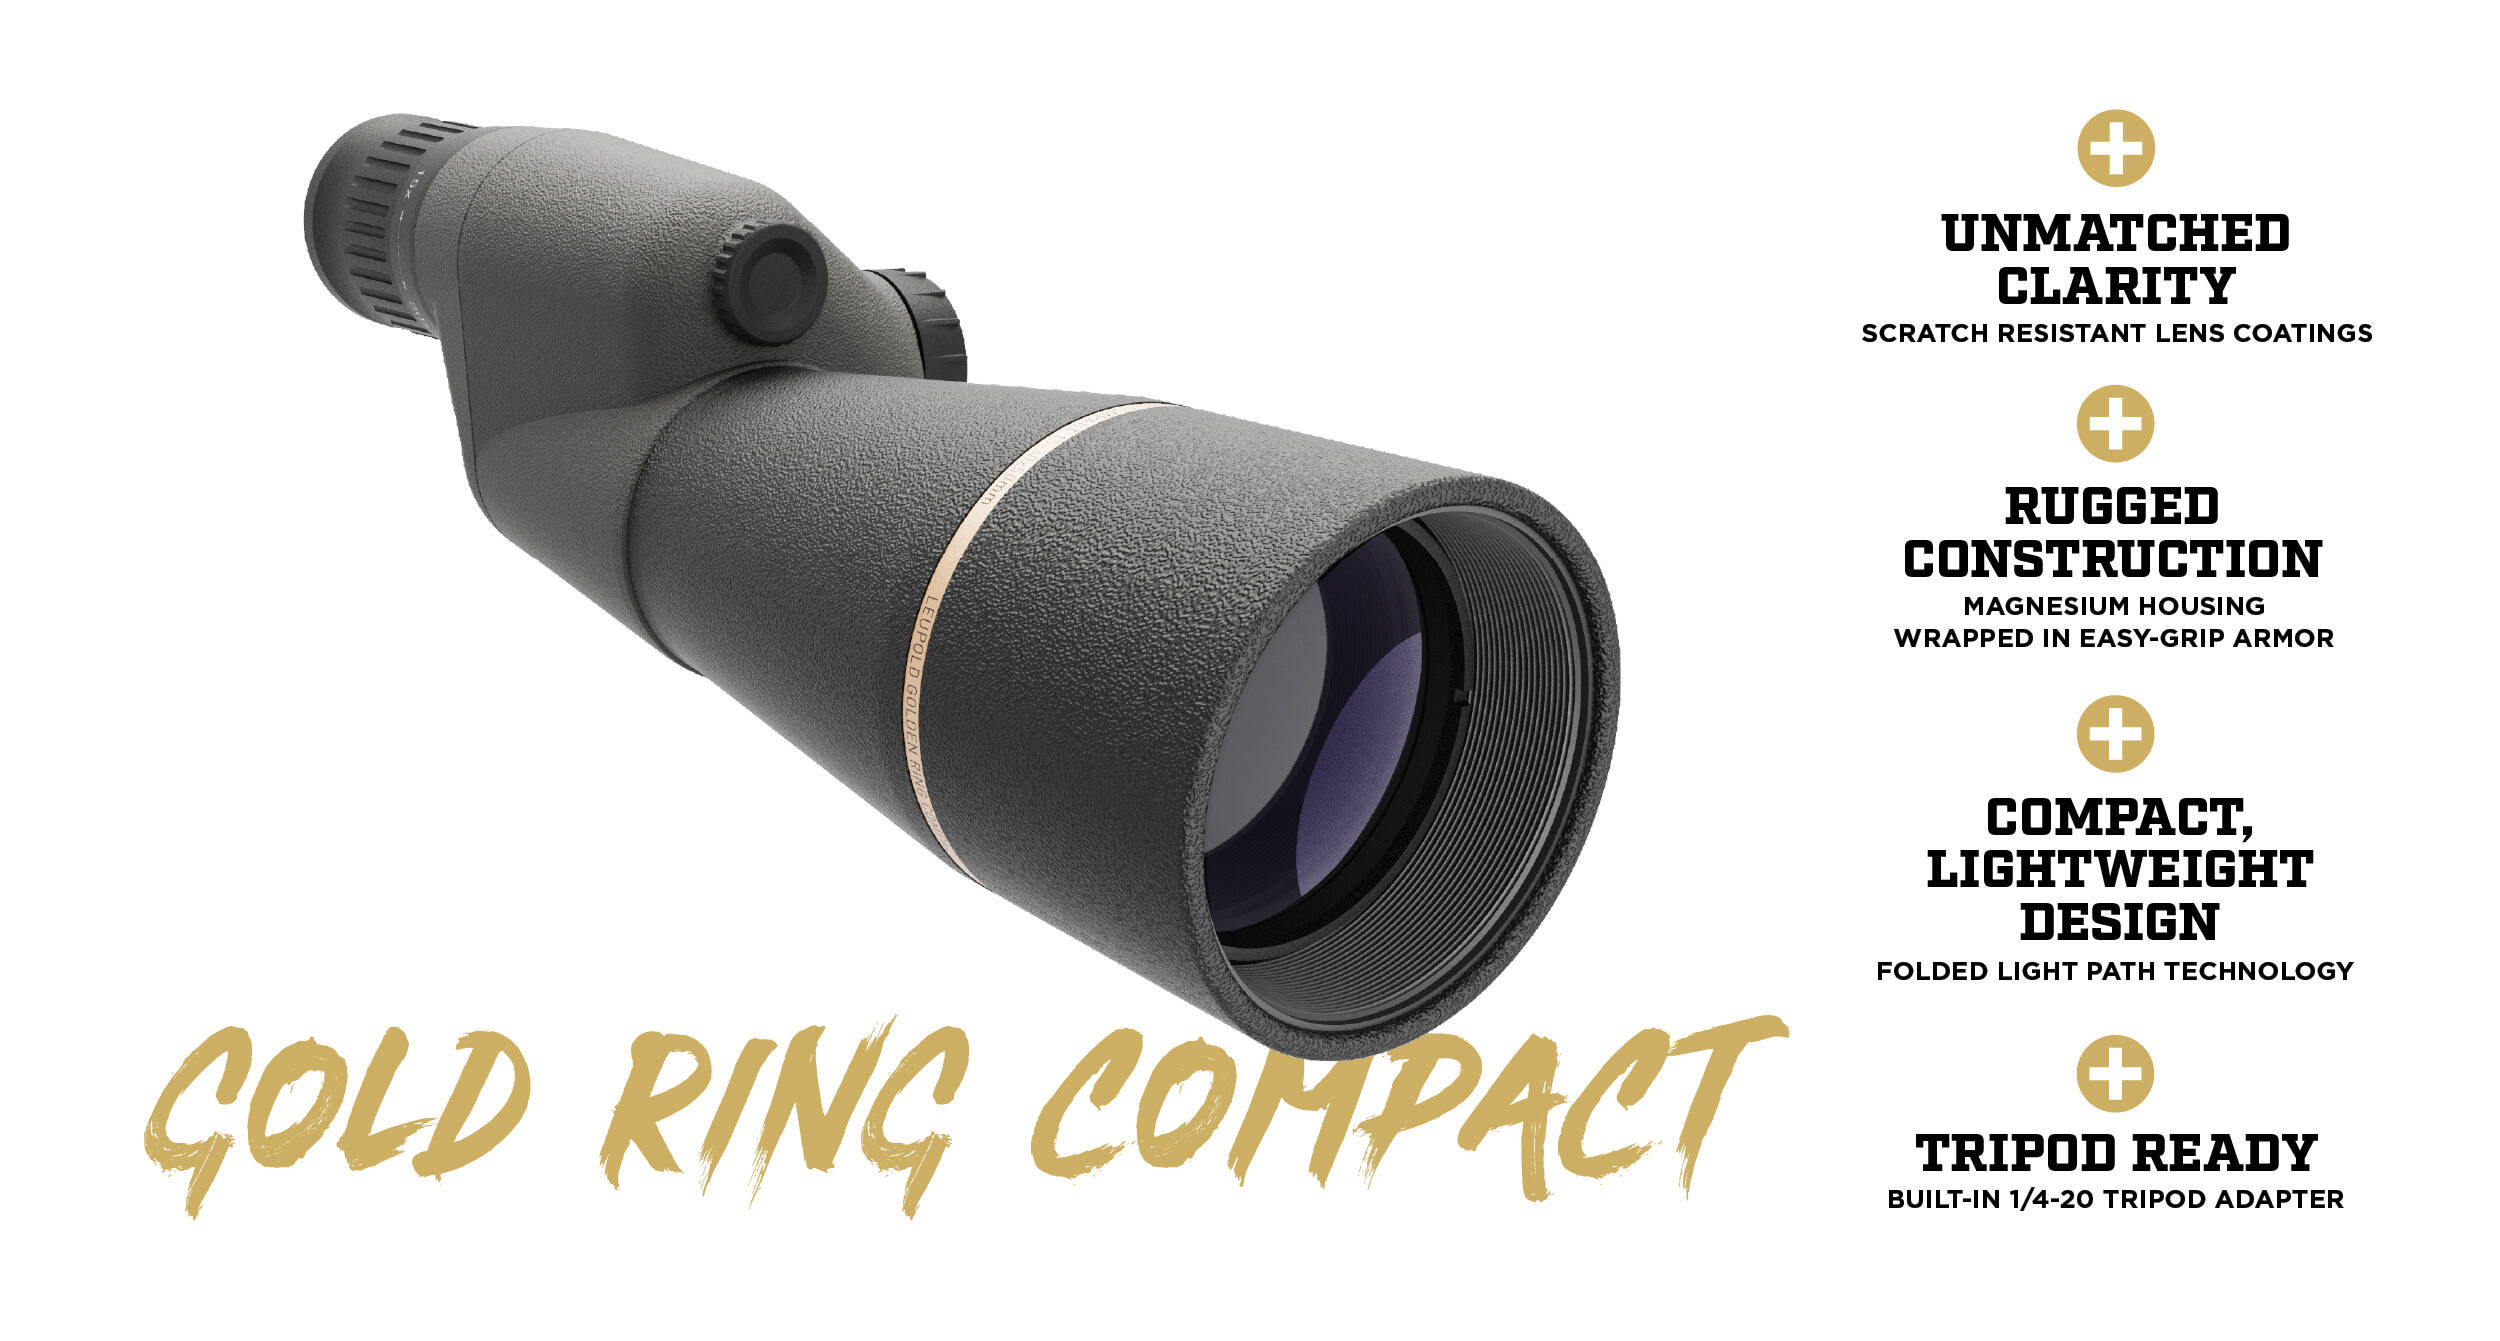 Leupold Gold Ring Compact 15 Spotter Scope